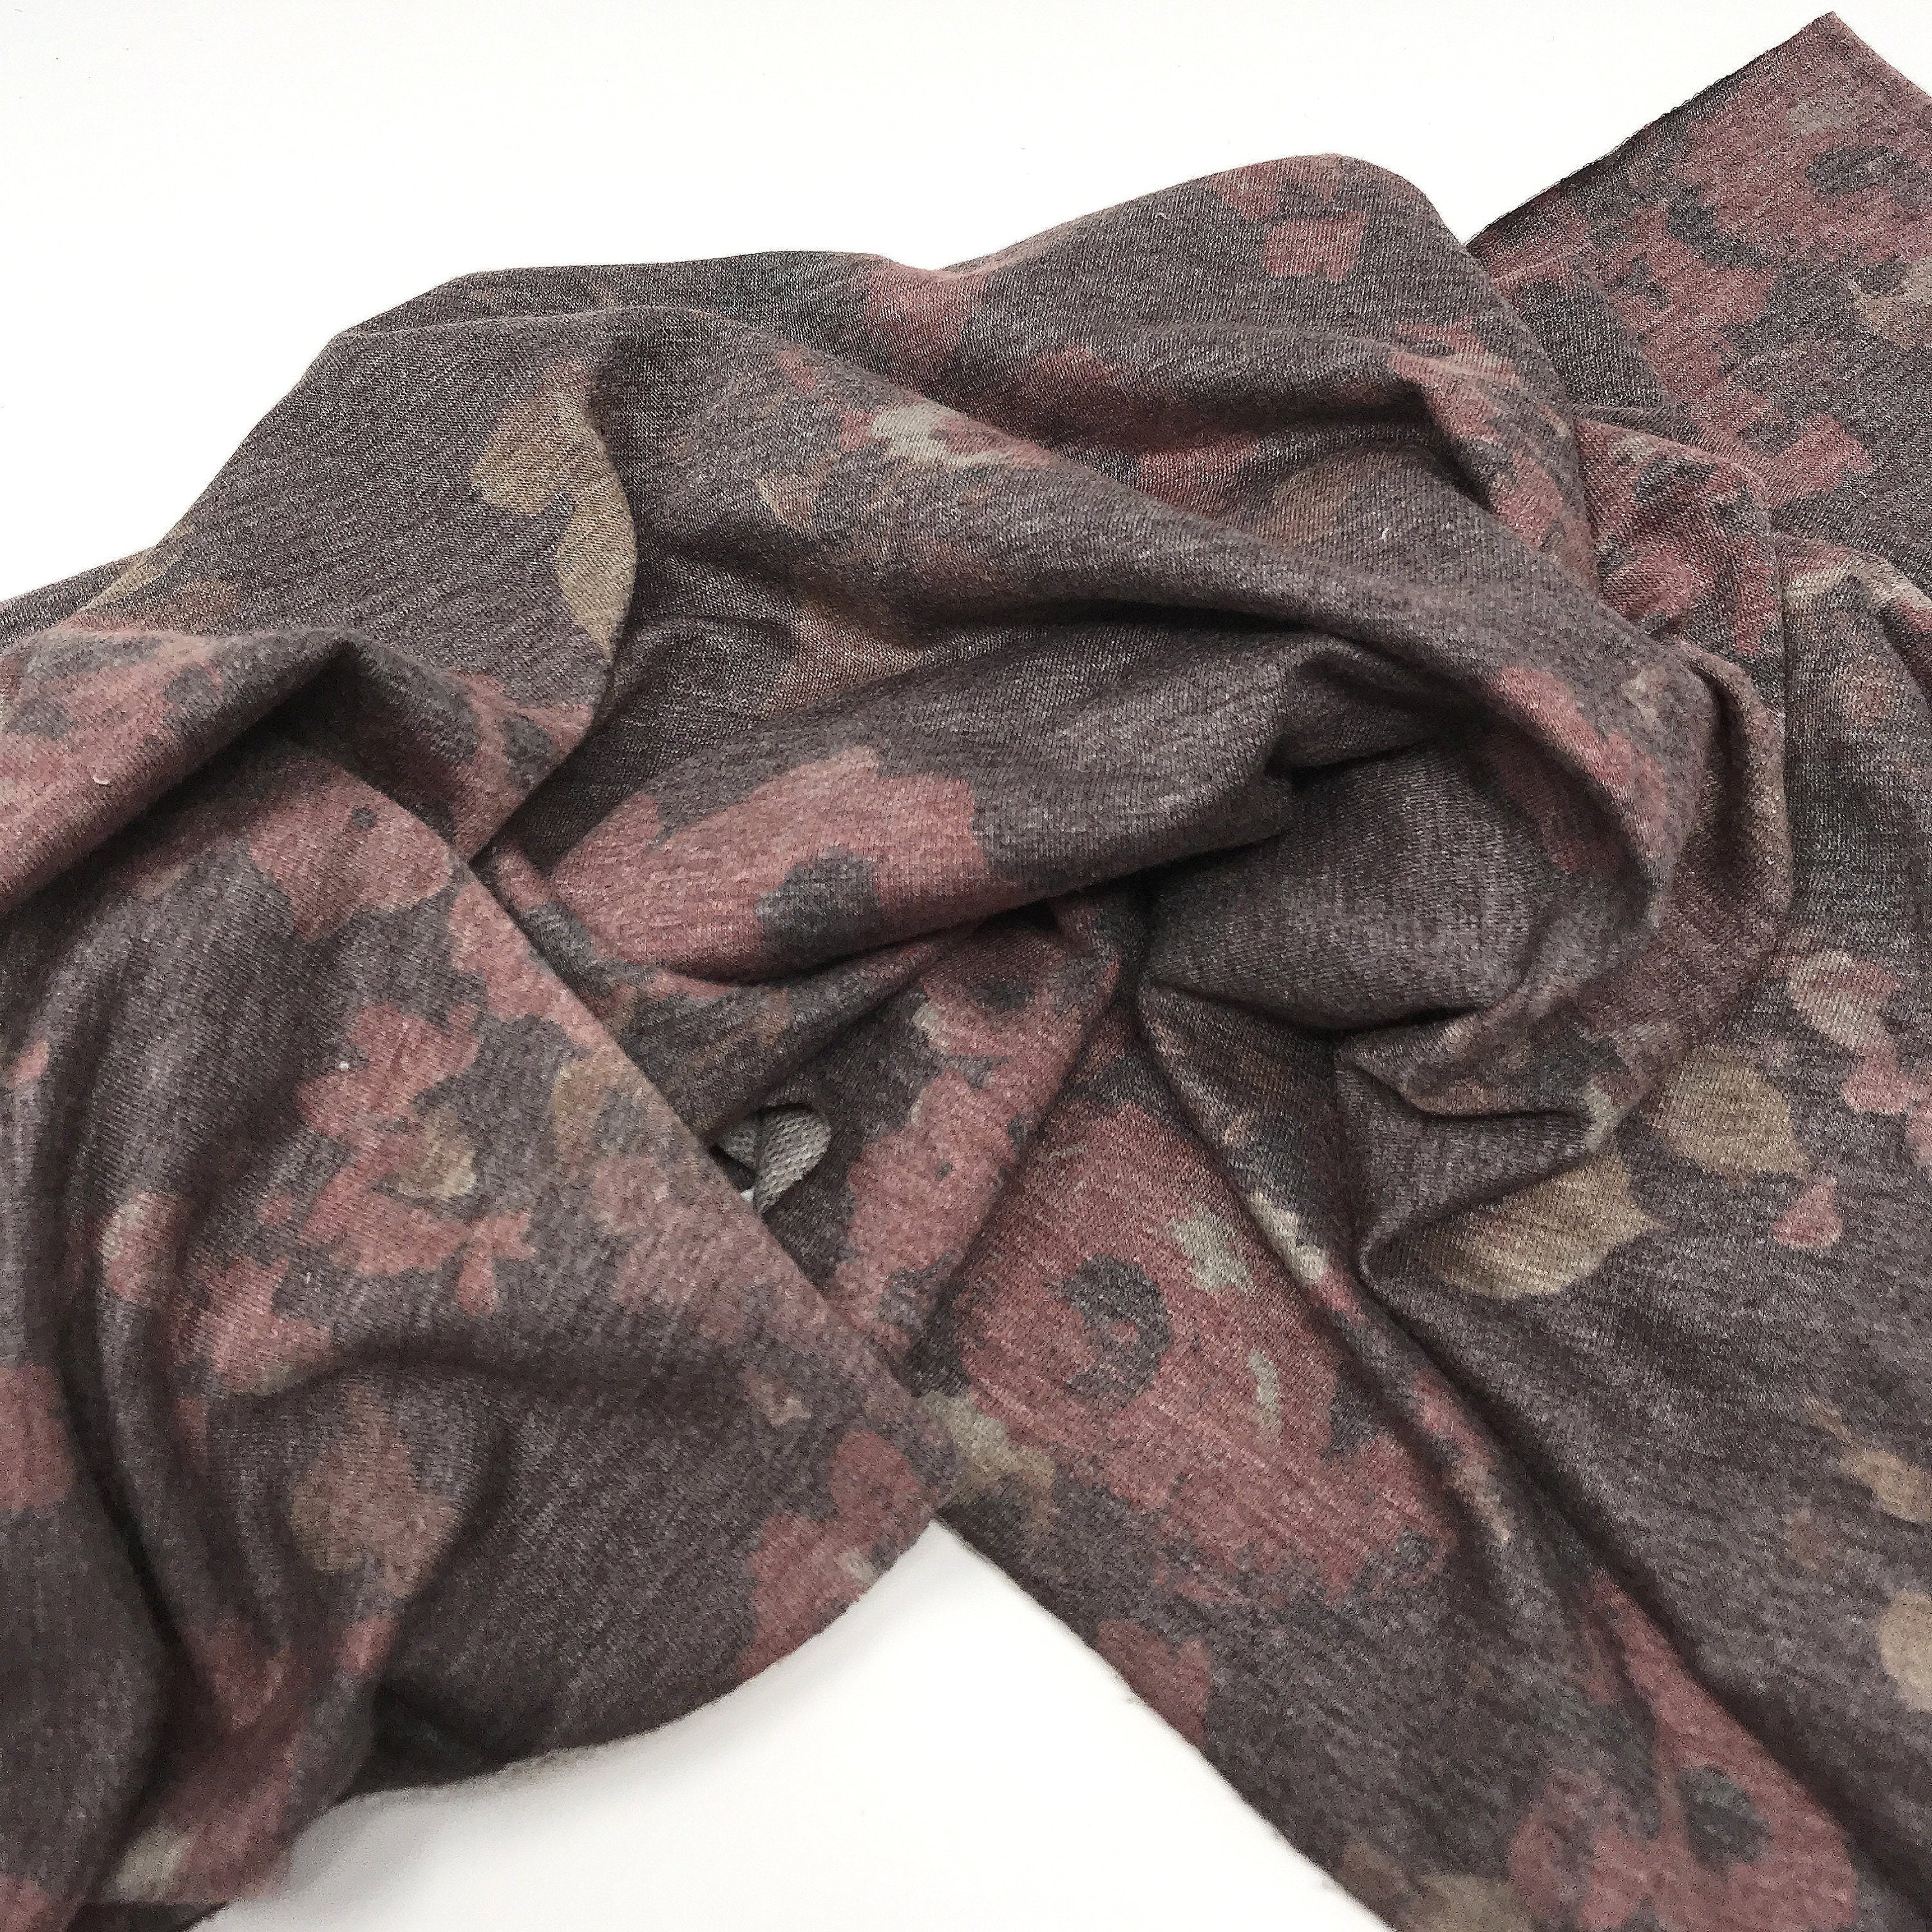 French Terry Knit Fabric Heather Chocolate Brown with Flower Print- by the 1/2 Yard-Stitch Love Studio